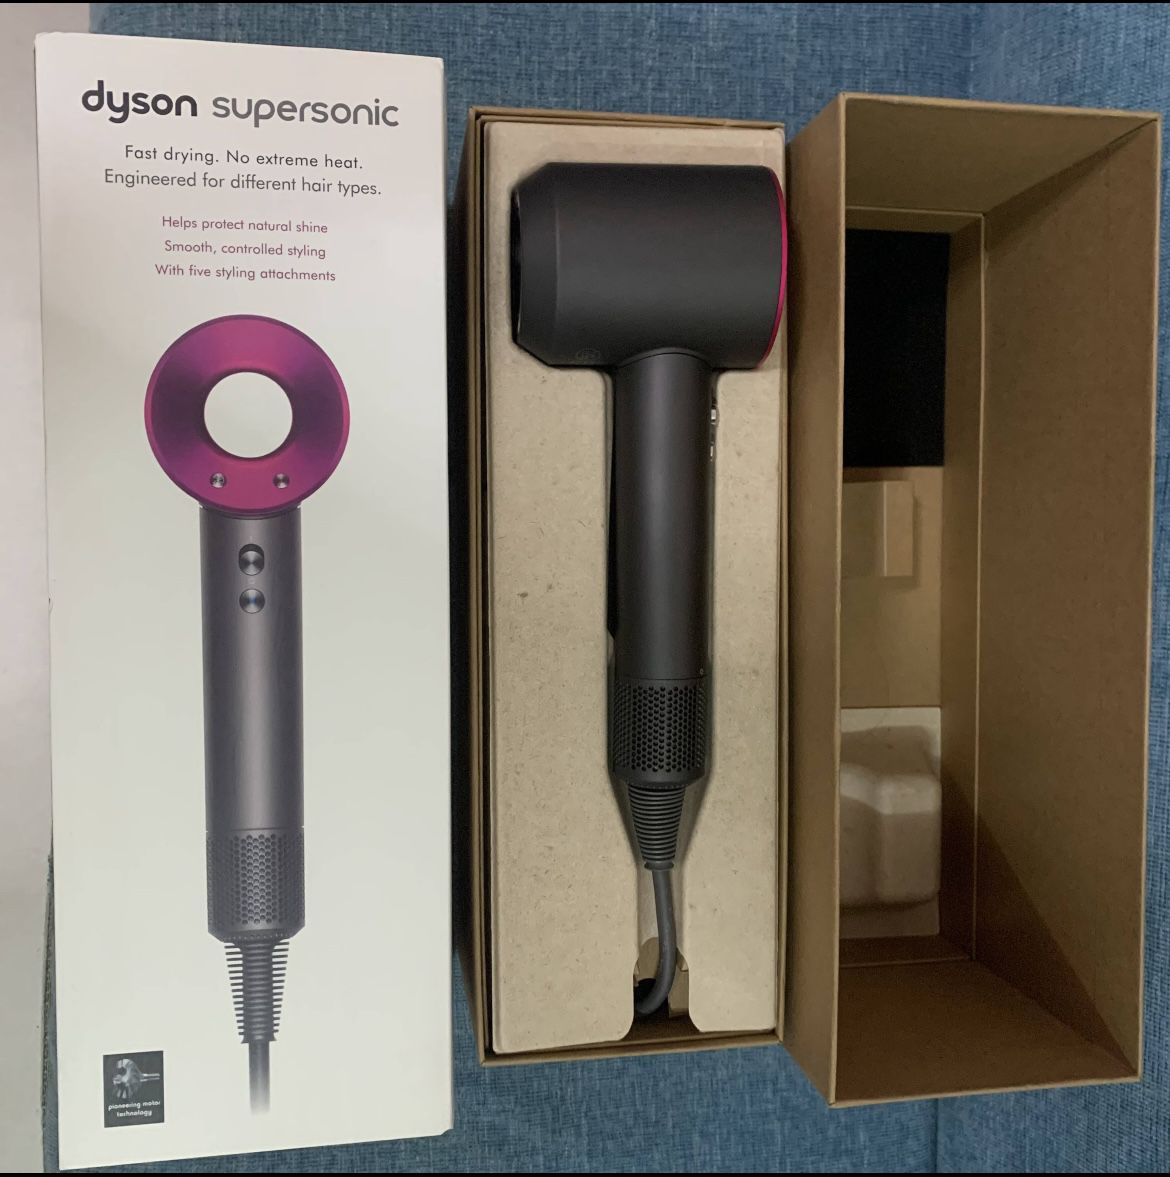 Dyson Supersonic Hair Dryer, HD08, Rose, With Attachments, Original & New!